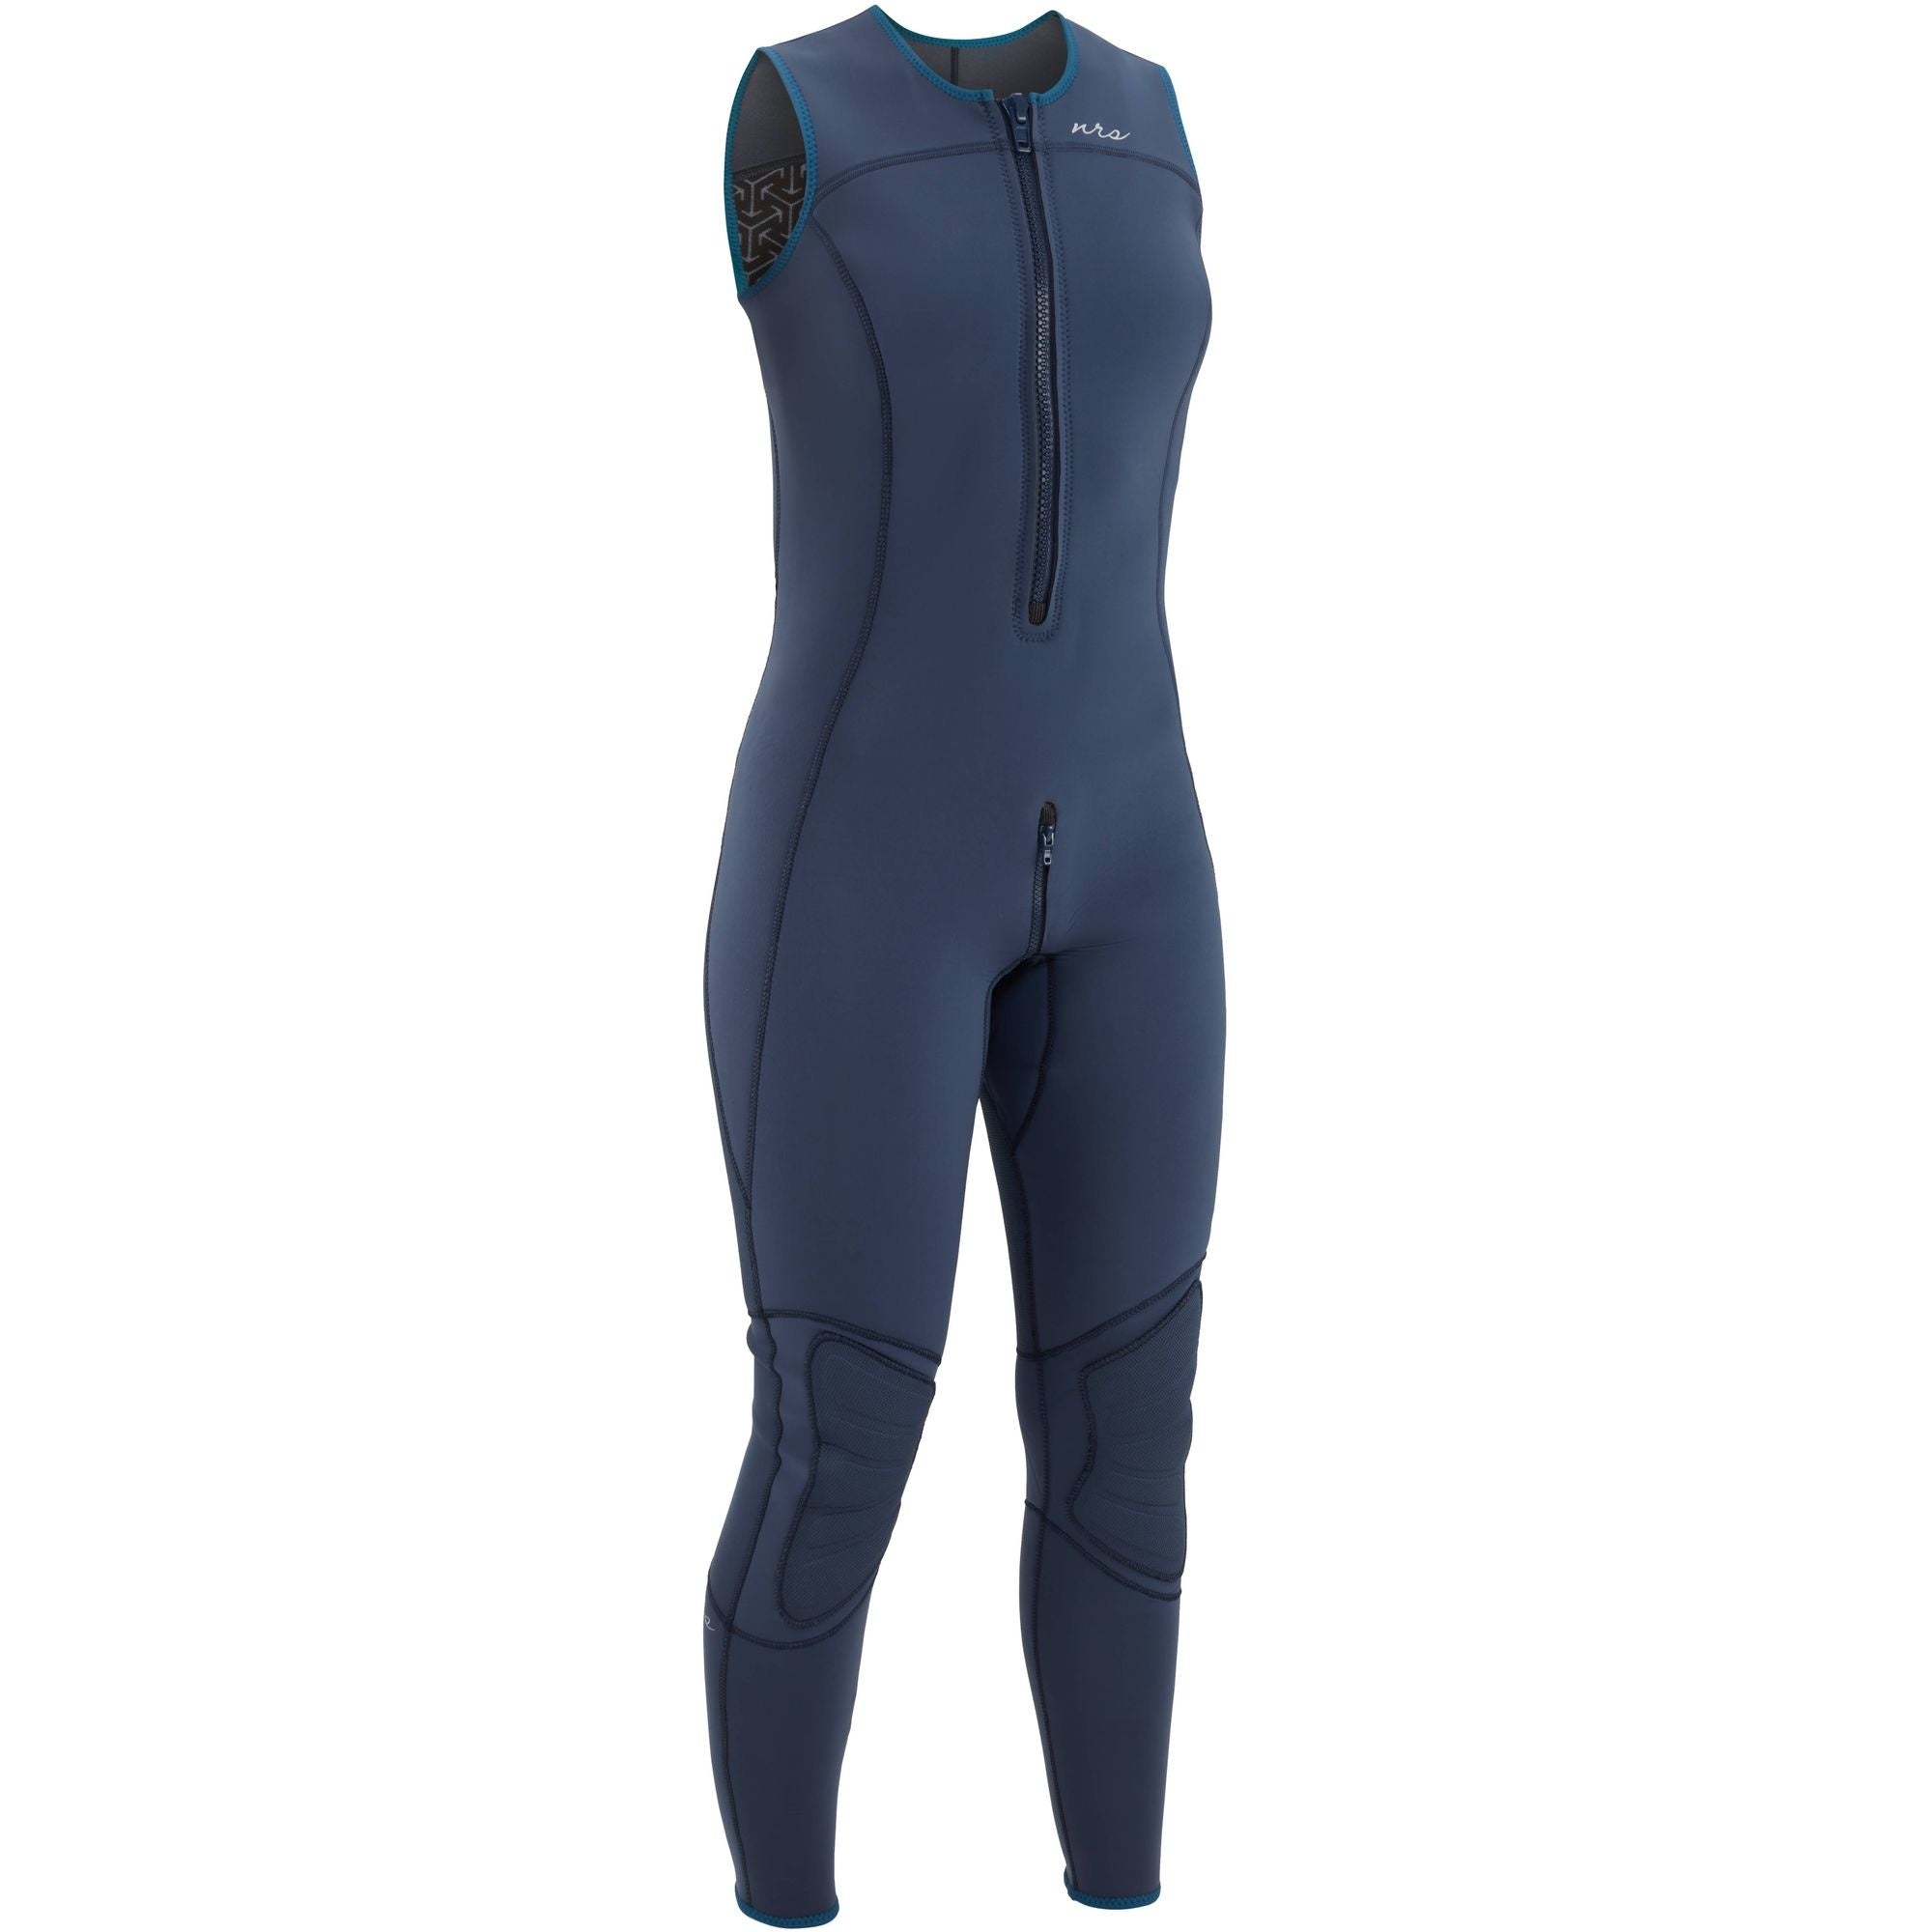 NRS - 3.0 Ultra Jane Wetsuit